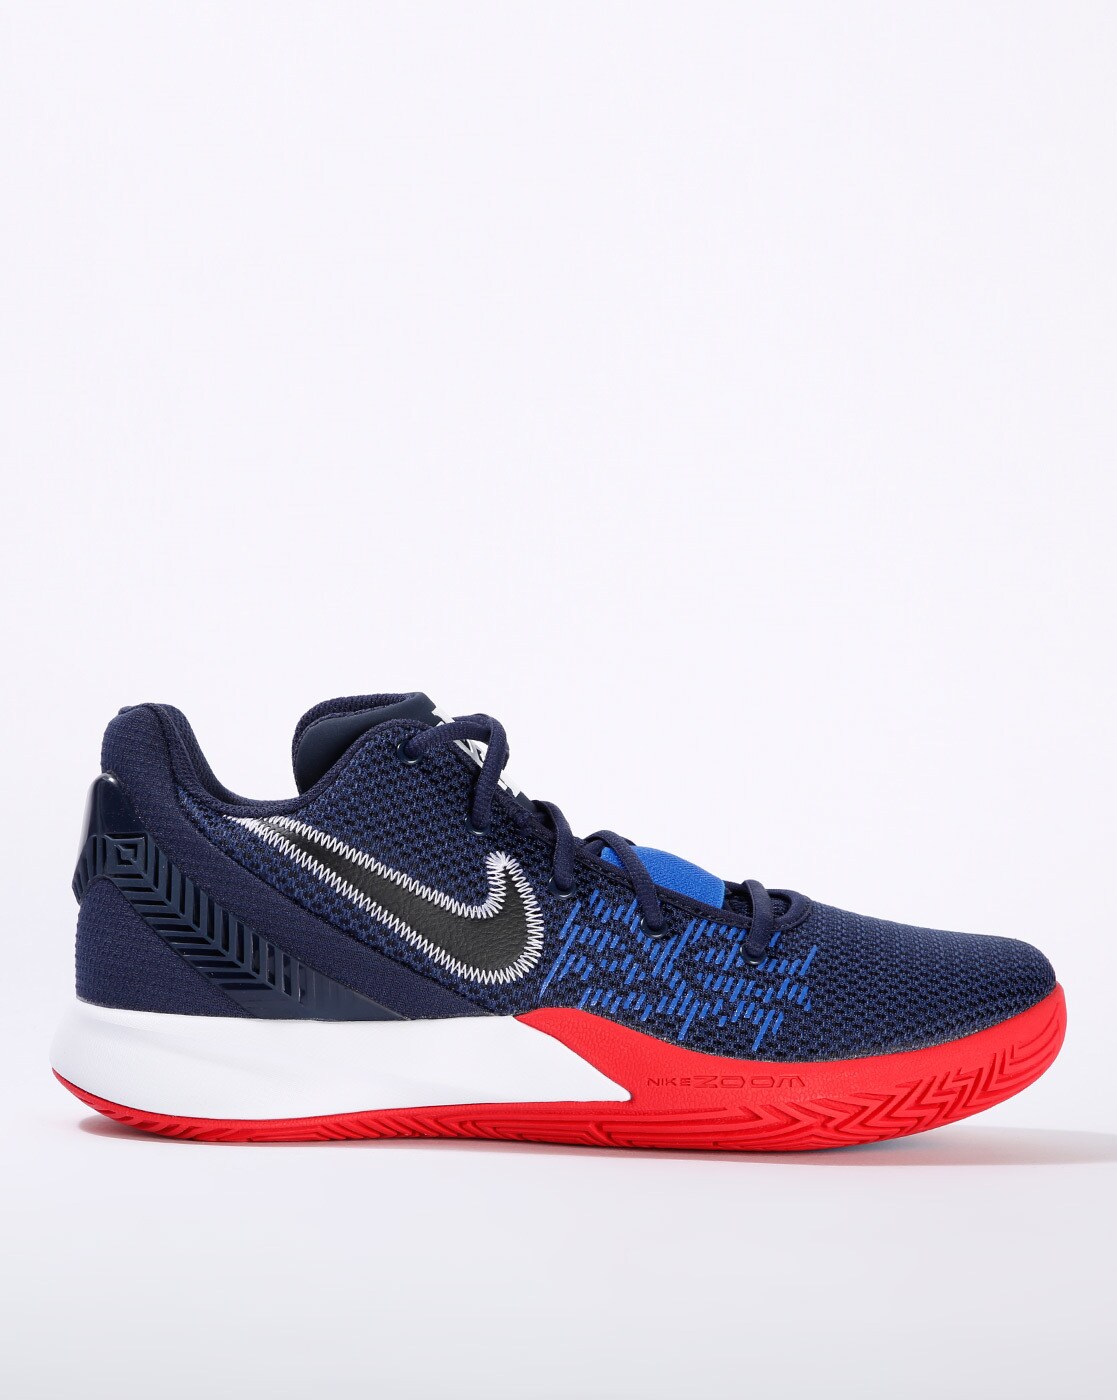 kyrie flytrap 2 blue and red